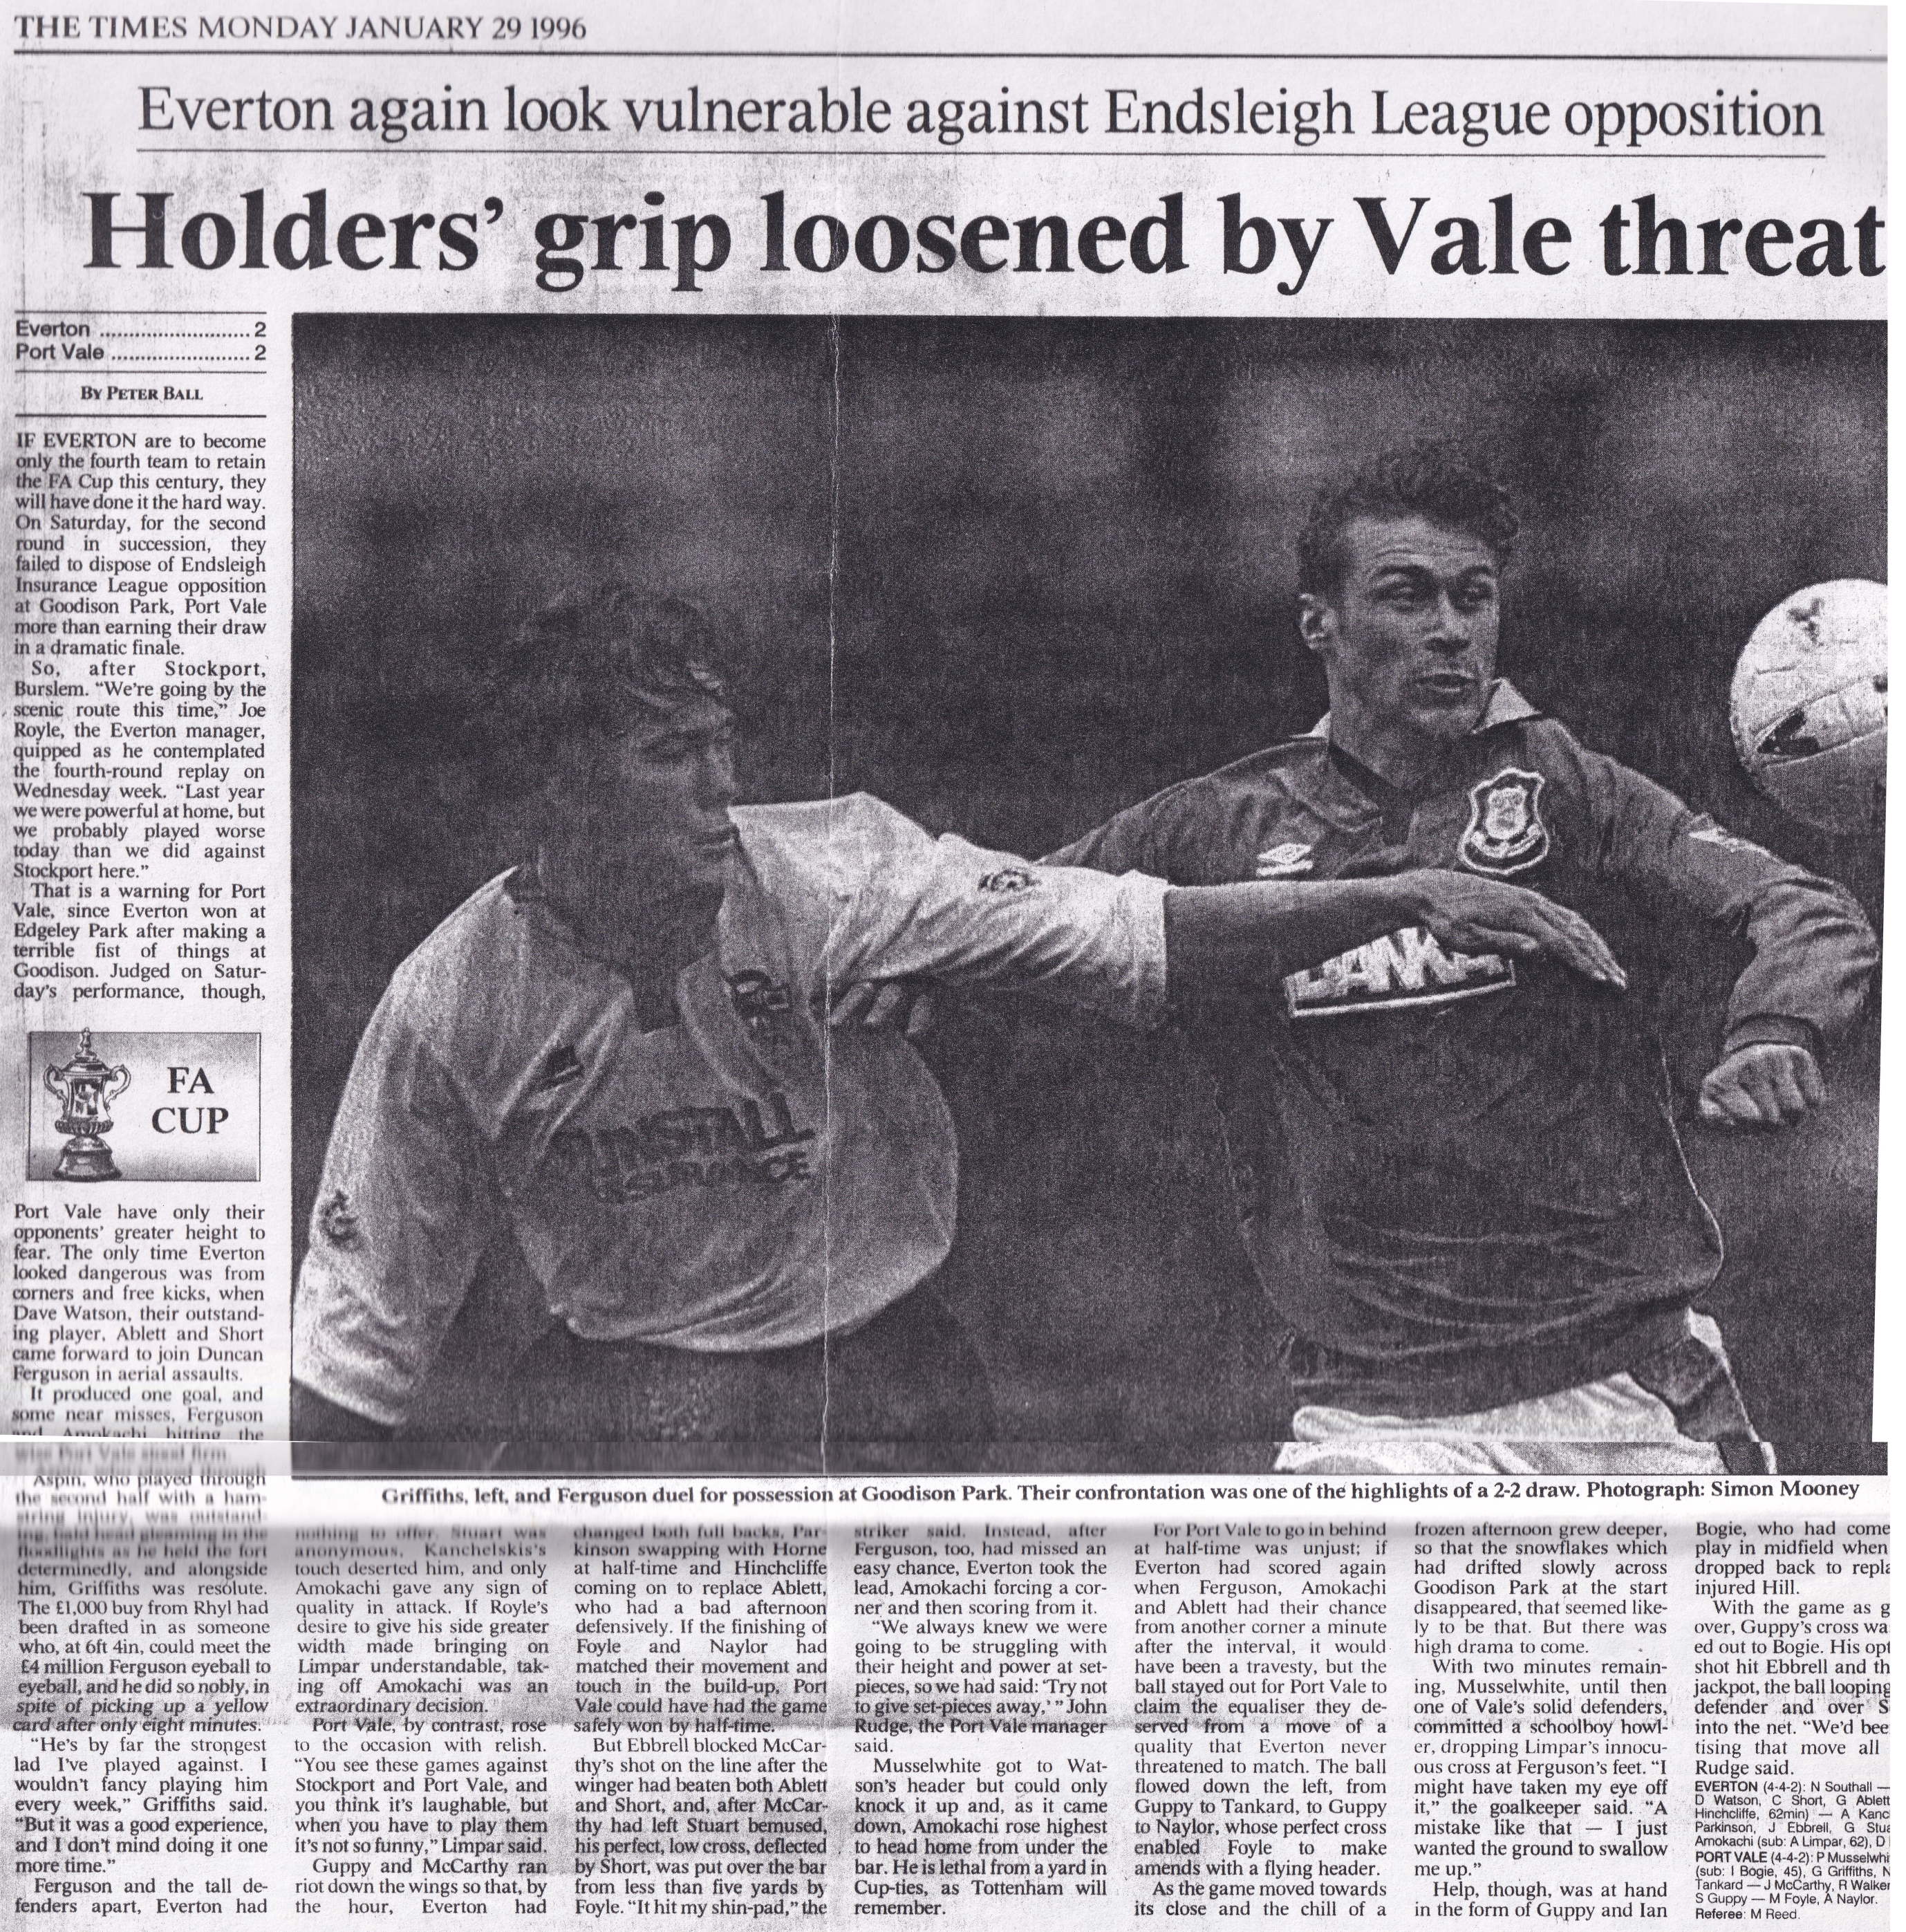 Everton 2-2 Port Vale press clipping: Holder's Grip Loosened by Vale threat